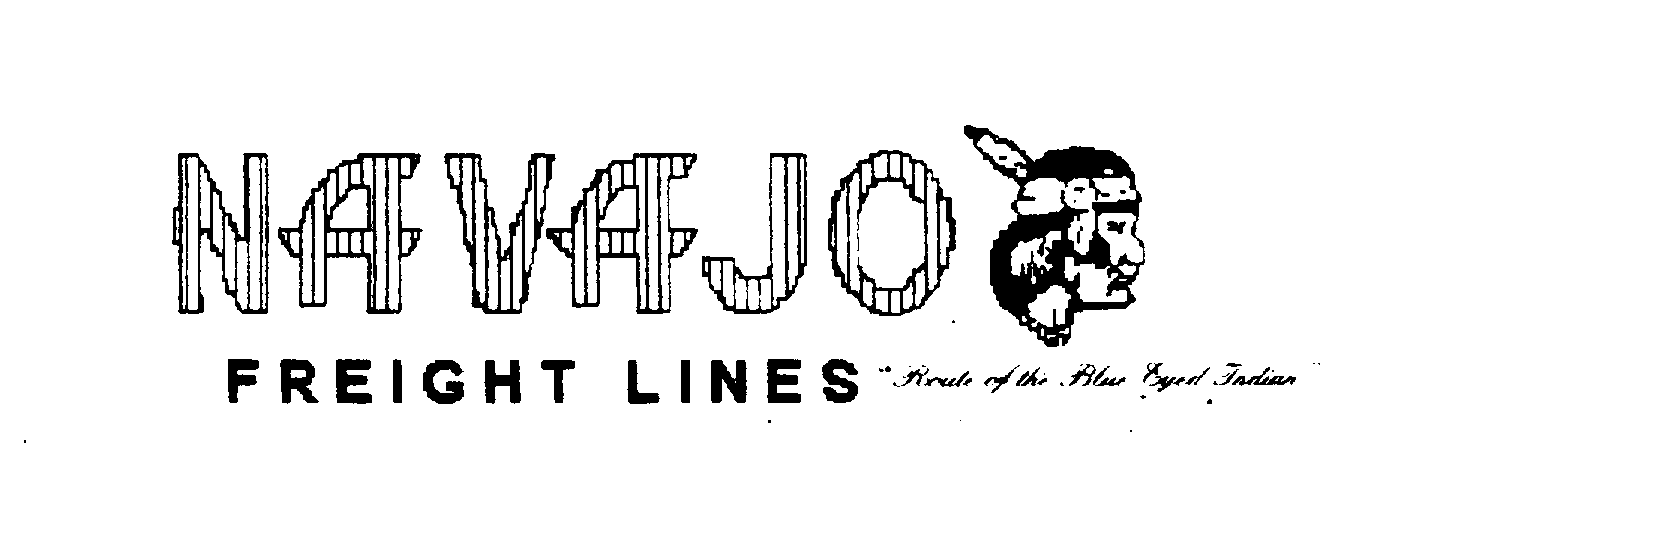 Trademark Logo NAVAJO FREIGHT LINES "ROUTE OF THE BLUE EYED INDIAN"